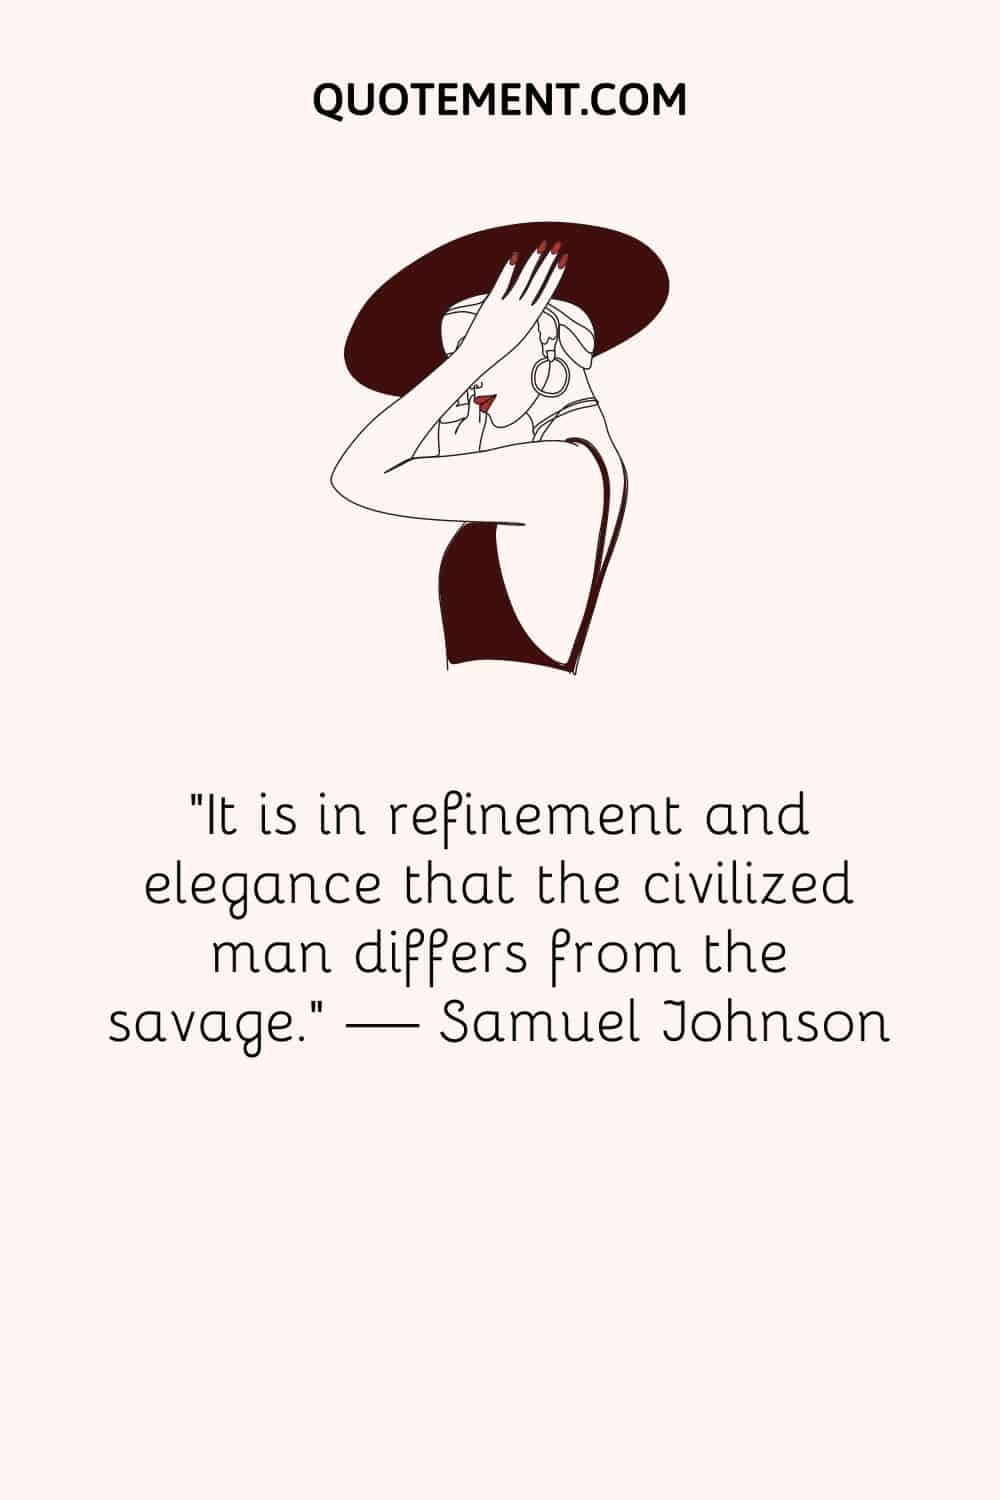 “It is in refinement and elegance that the civilized man differs from the savage.” — Samuel Johnson